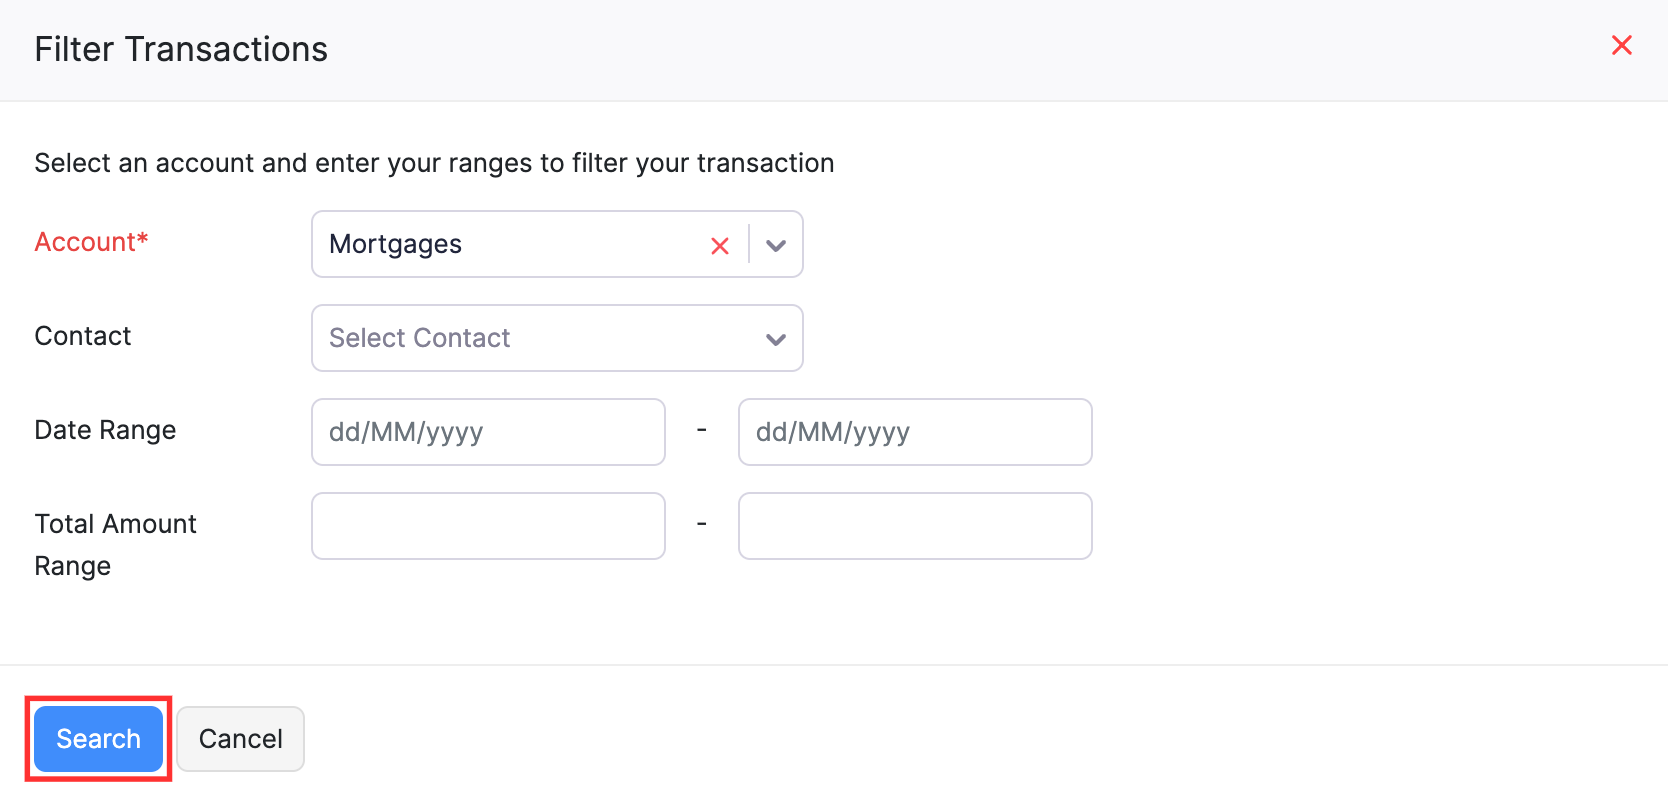 Filter transactions whose account is Mortgages